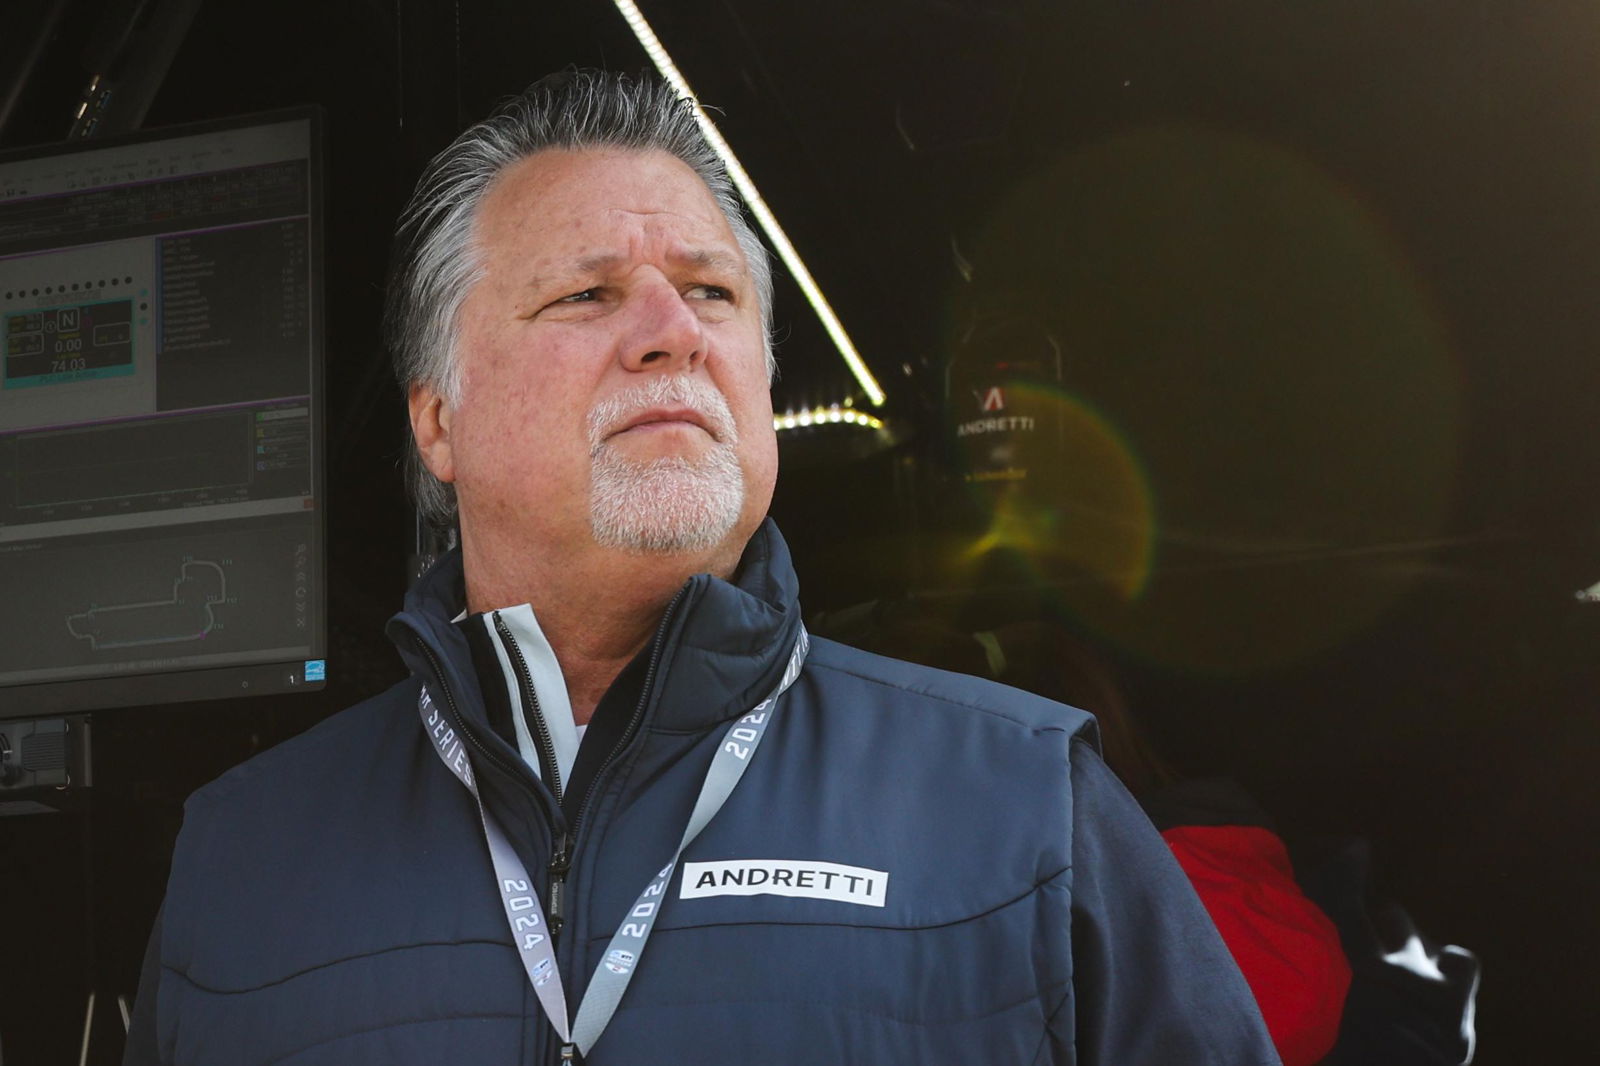 The United States Congress has written to F1 commercial rights holder questioning why Andretti Global's entry was rejected. Image: Penske Entertainment/Chris Owens